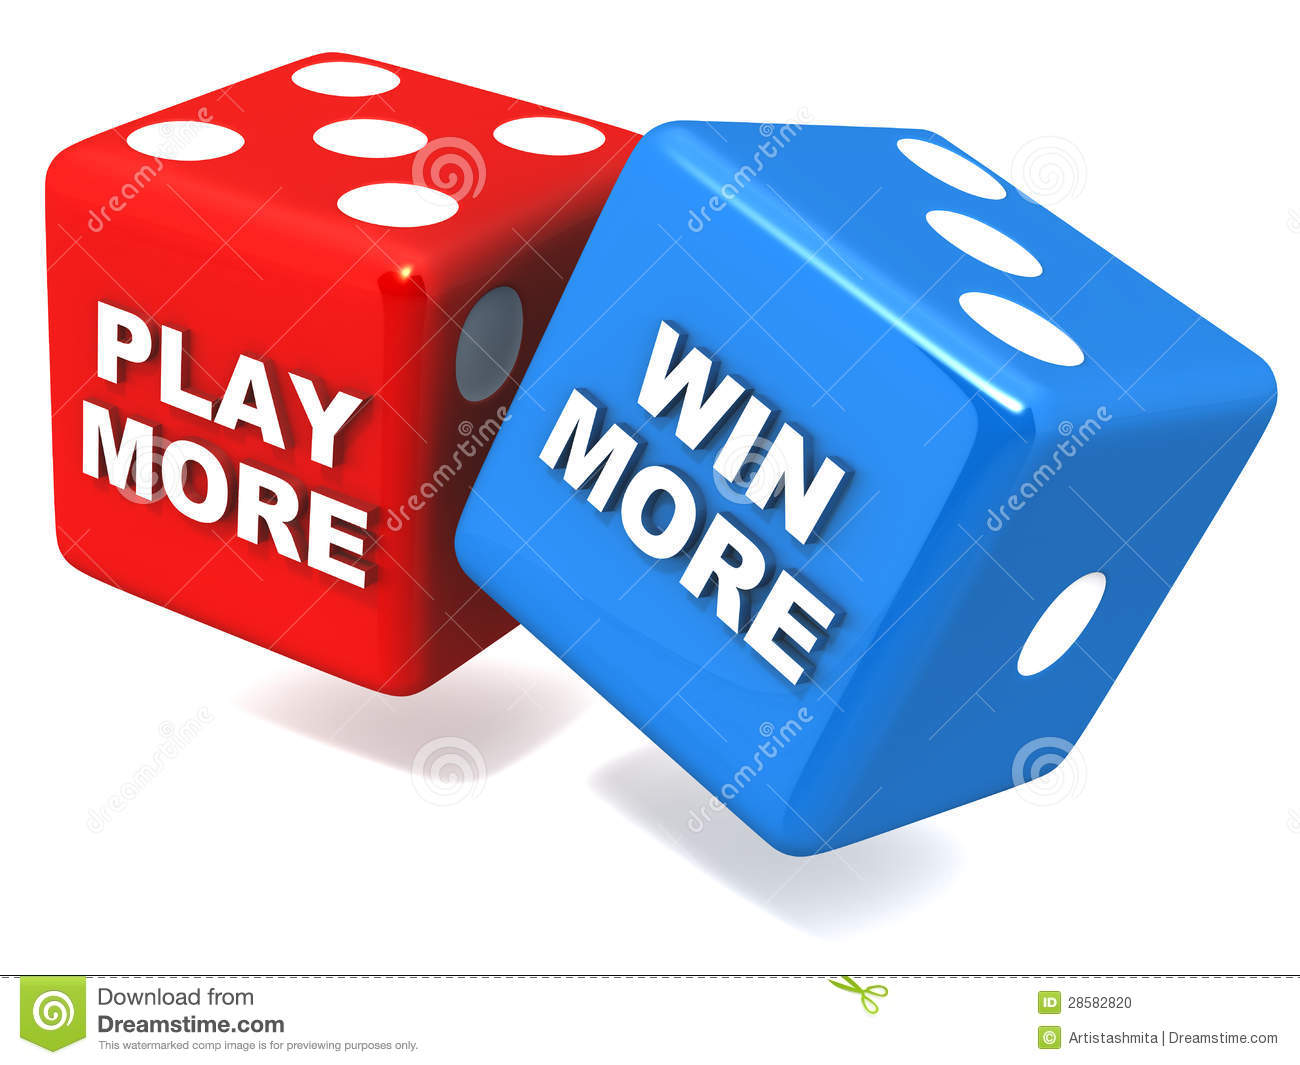 Play More To Win More Concept Of Improving Chances Of More Wins If    